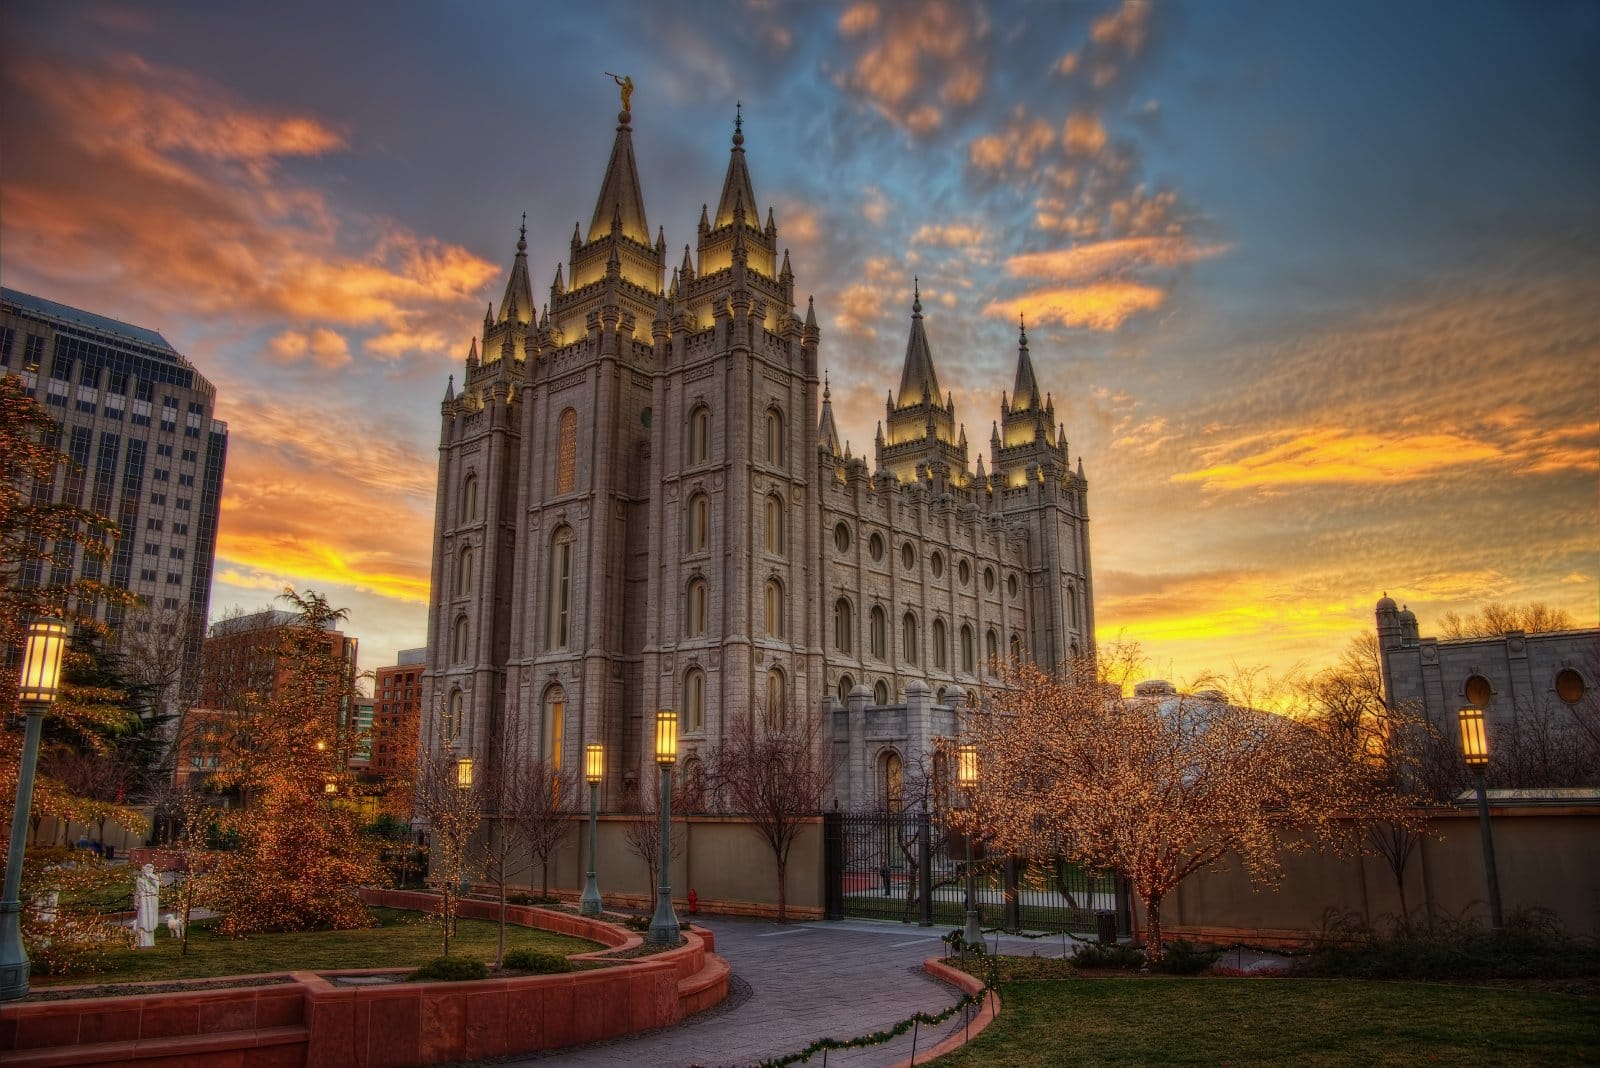 Image Credit: Shutterstock / Lukas Bischoff Photograph <p><span>Though primarily associated with the LDS Church, its significance in American religious history and its stunning Gothic and Romanesque architecture attract visitors of all Christian denominations.</span></p>